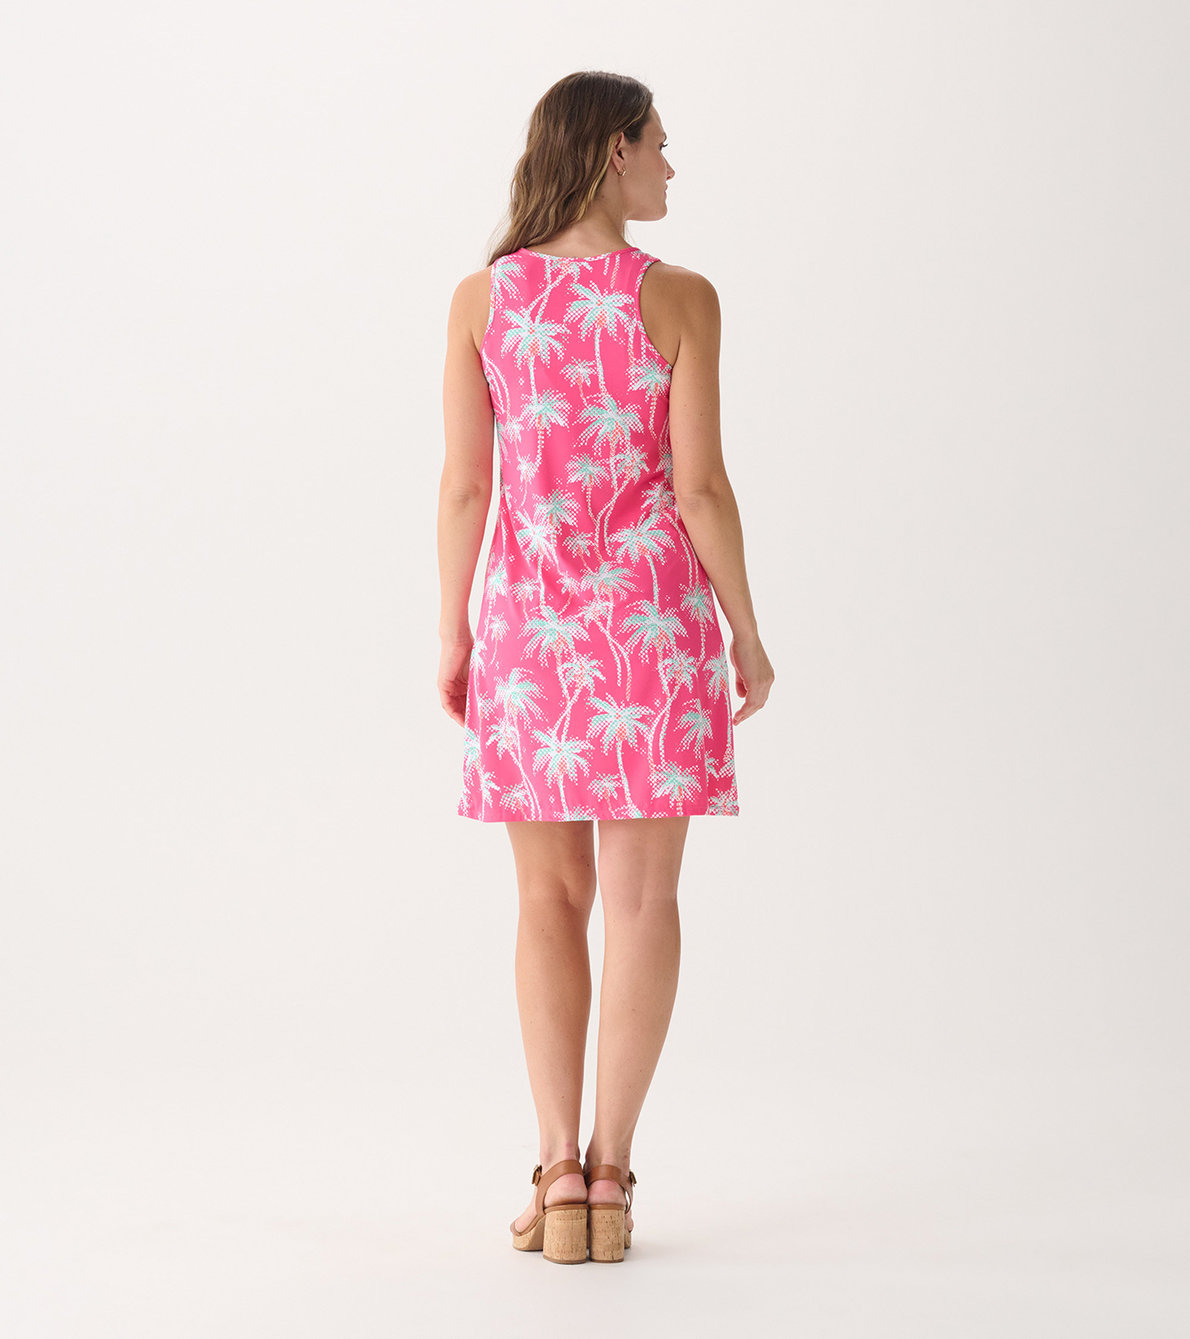 View larger image of Women's Palm Mirage Summer Dress